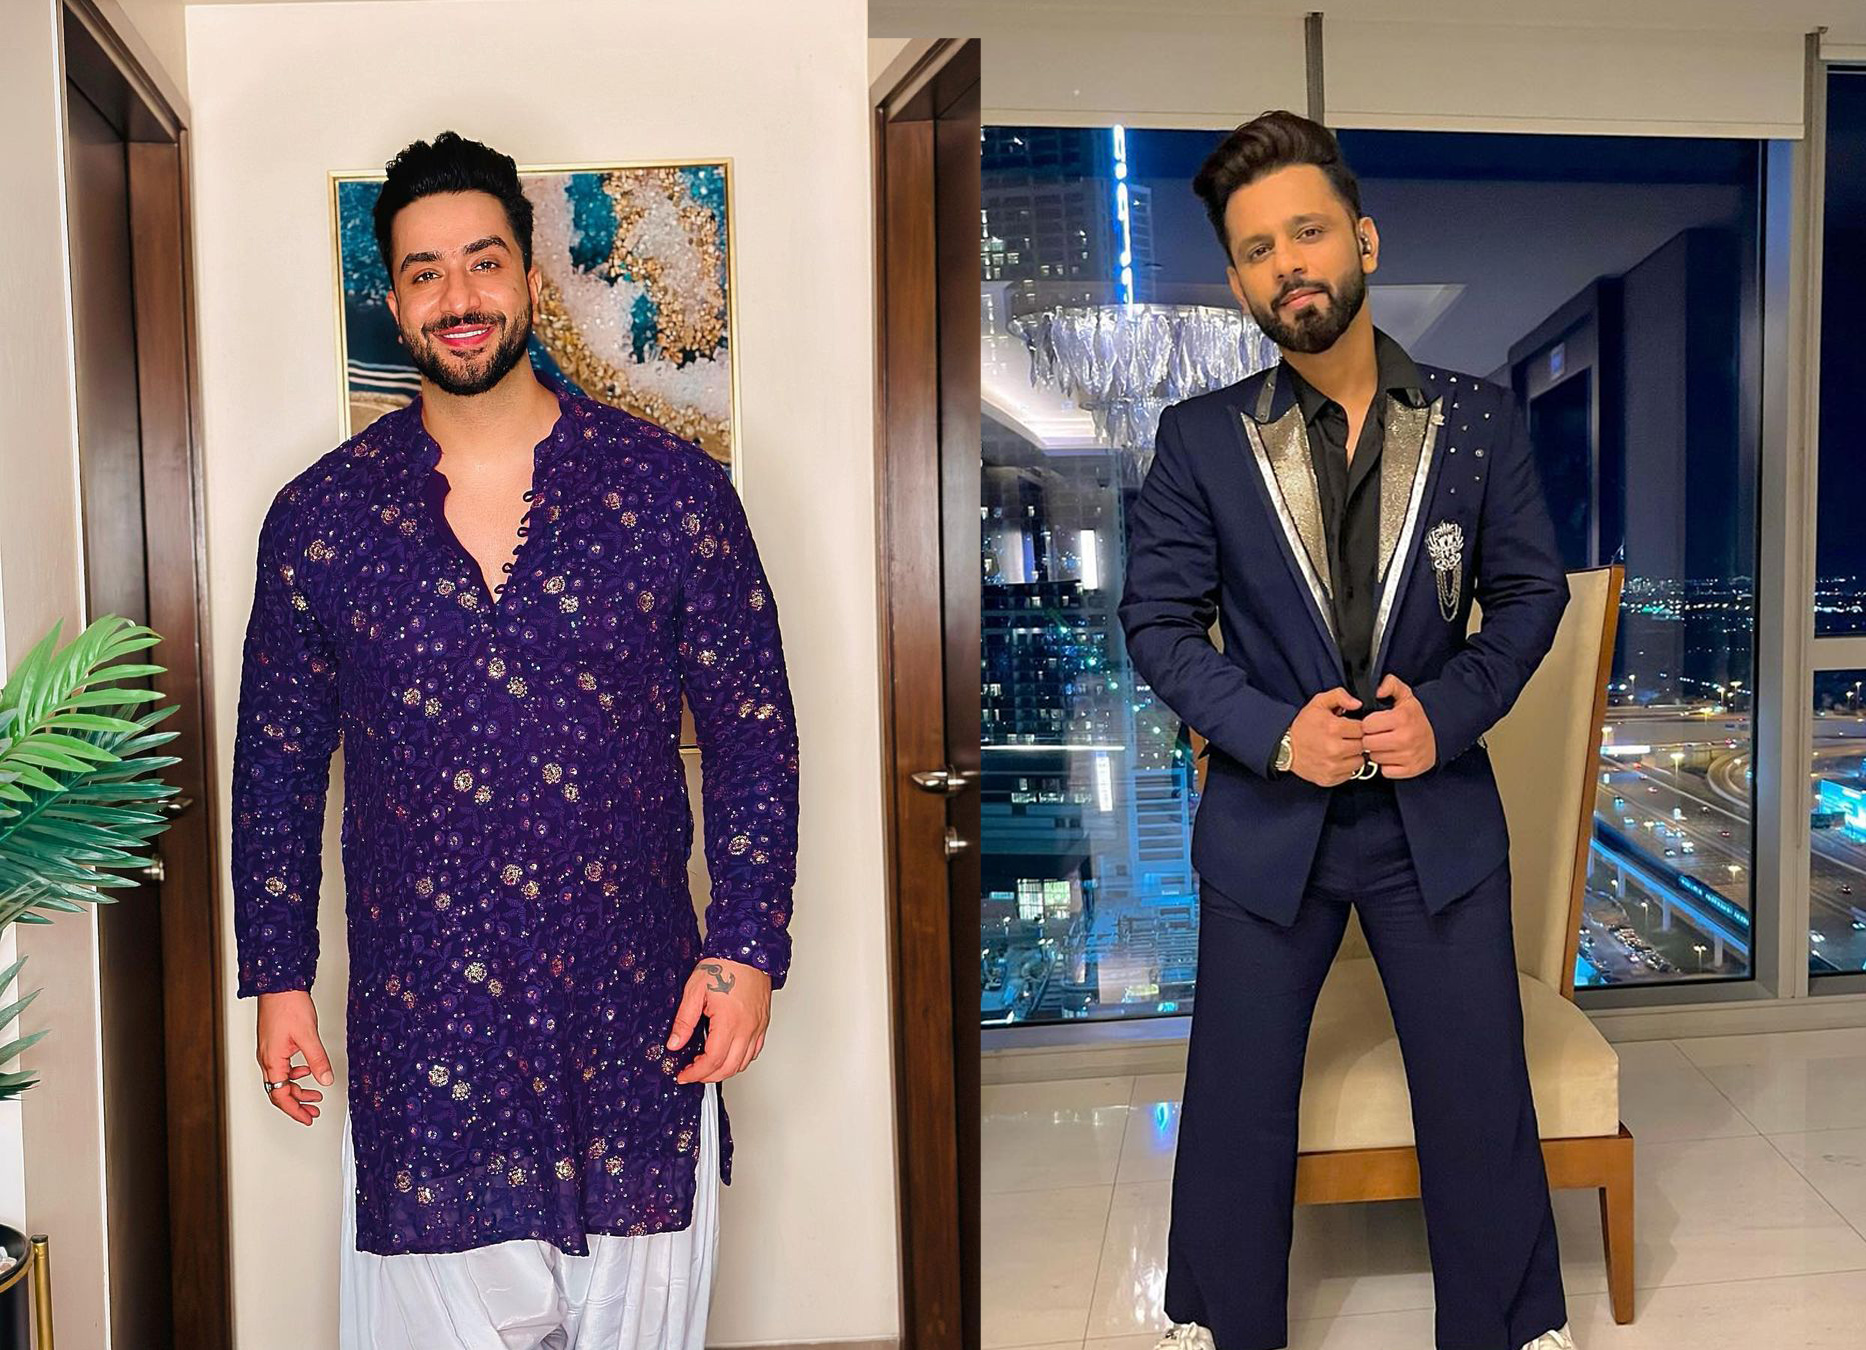 Actor Aly Goni Replies Love U Bro For Raghul Vaidya’s Sweet Note! He Recalls His Bigg Boss 14 Journey After These Years.